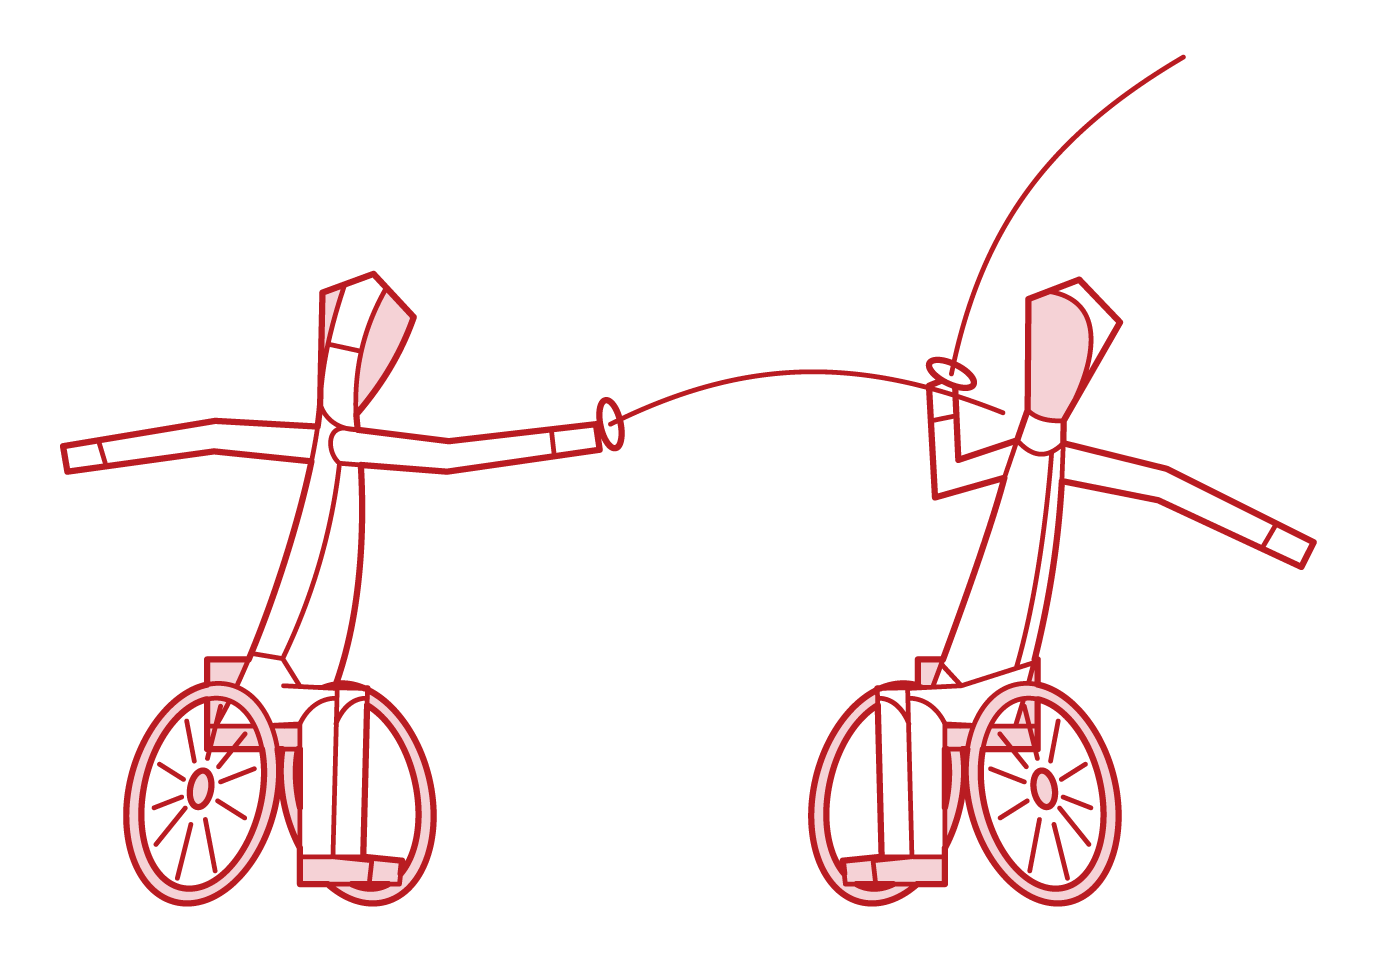 Illustration of a wheelchair fencing player playing a game